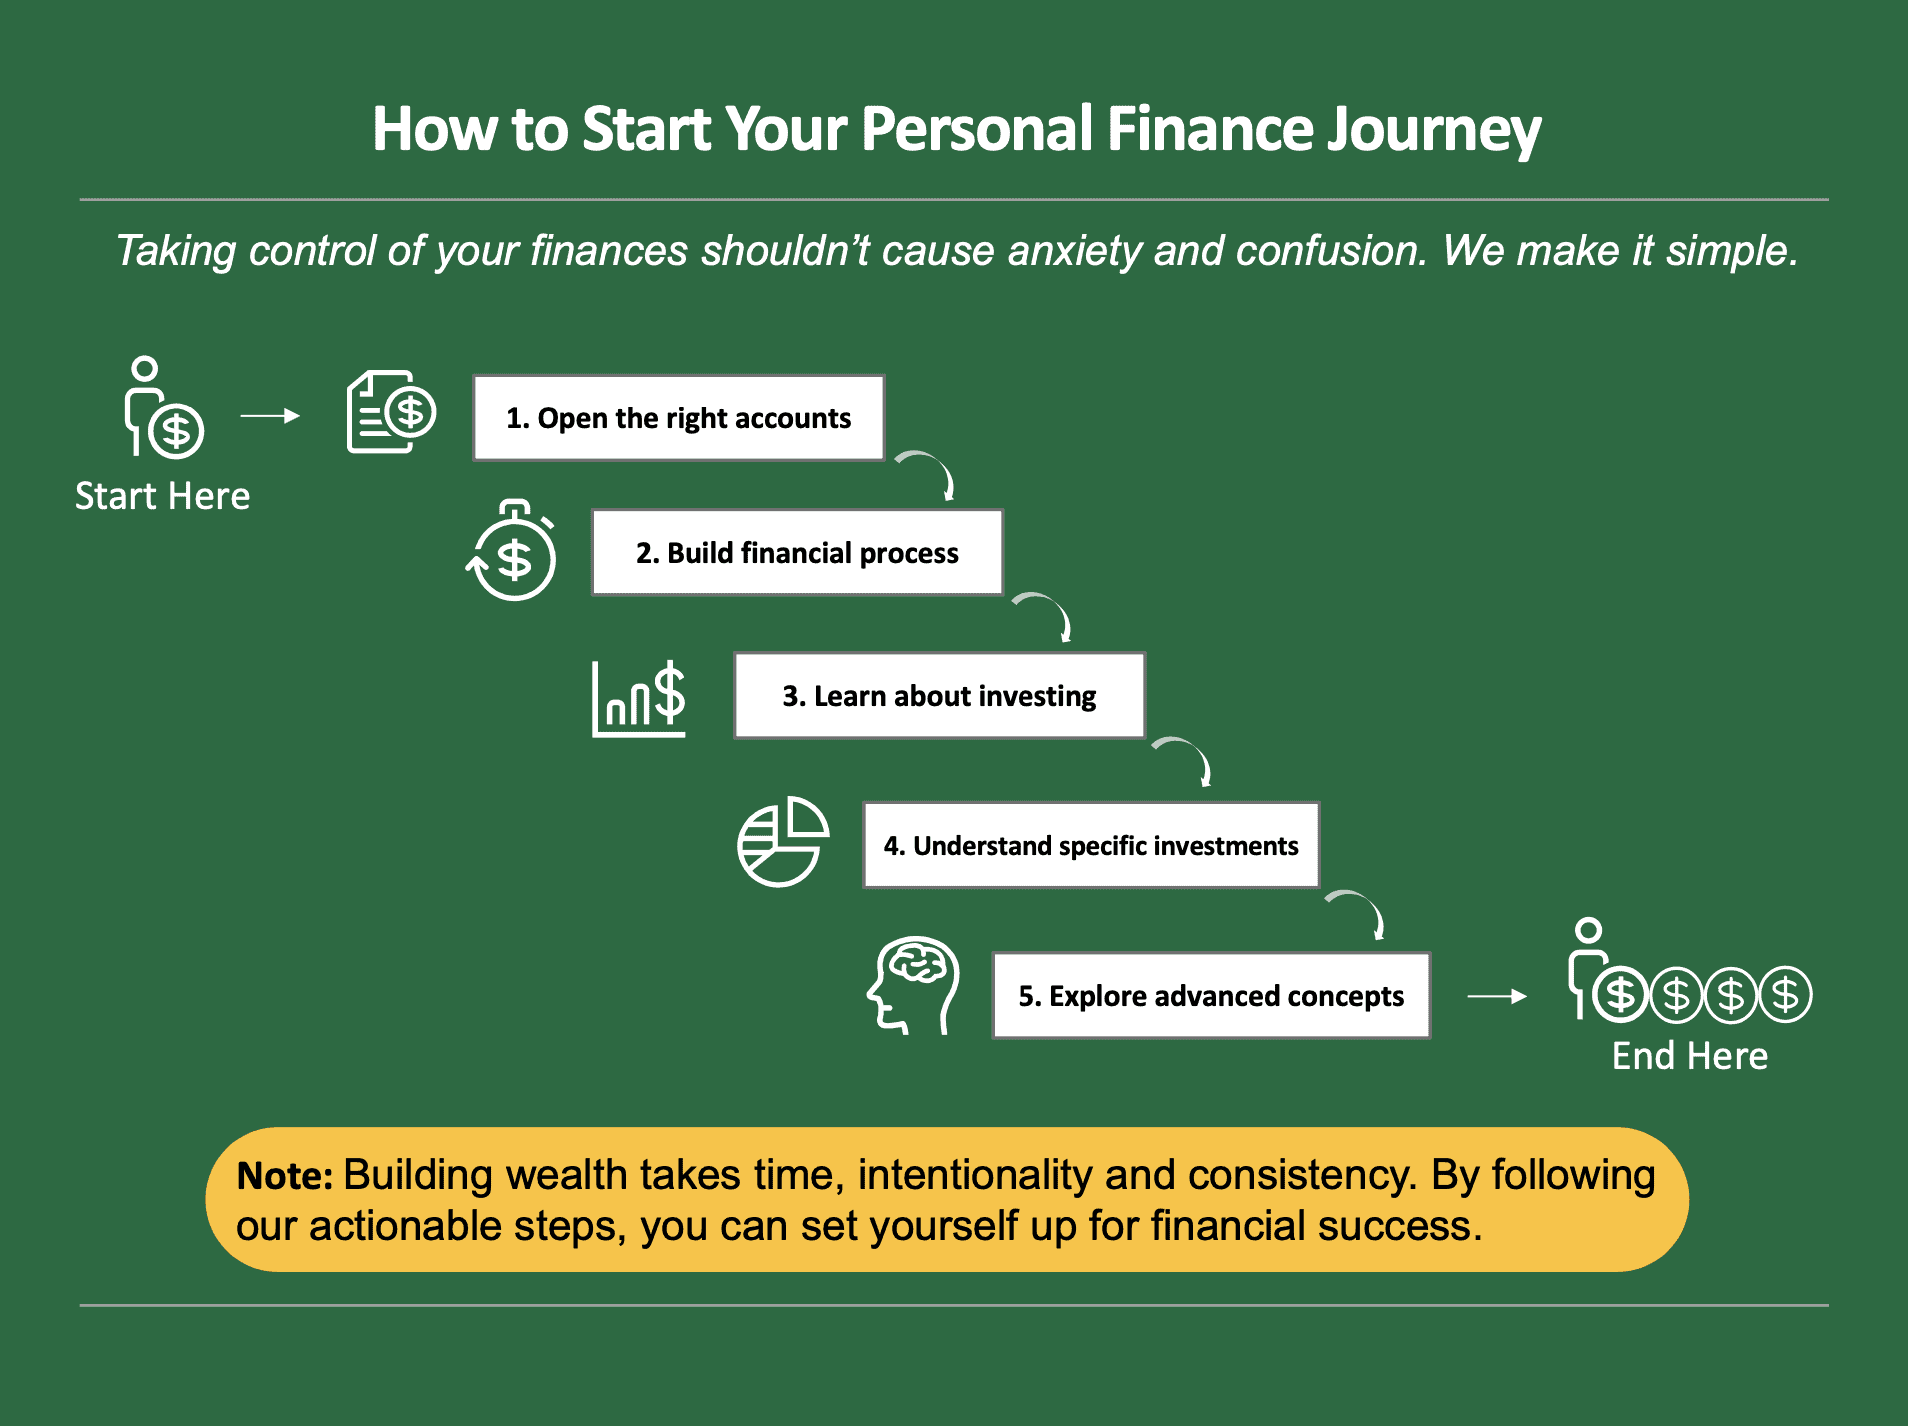 How to start your personal finance journey